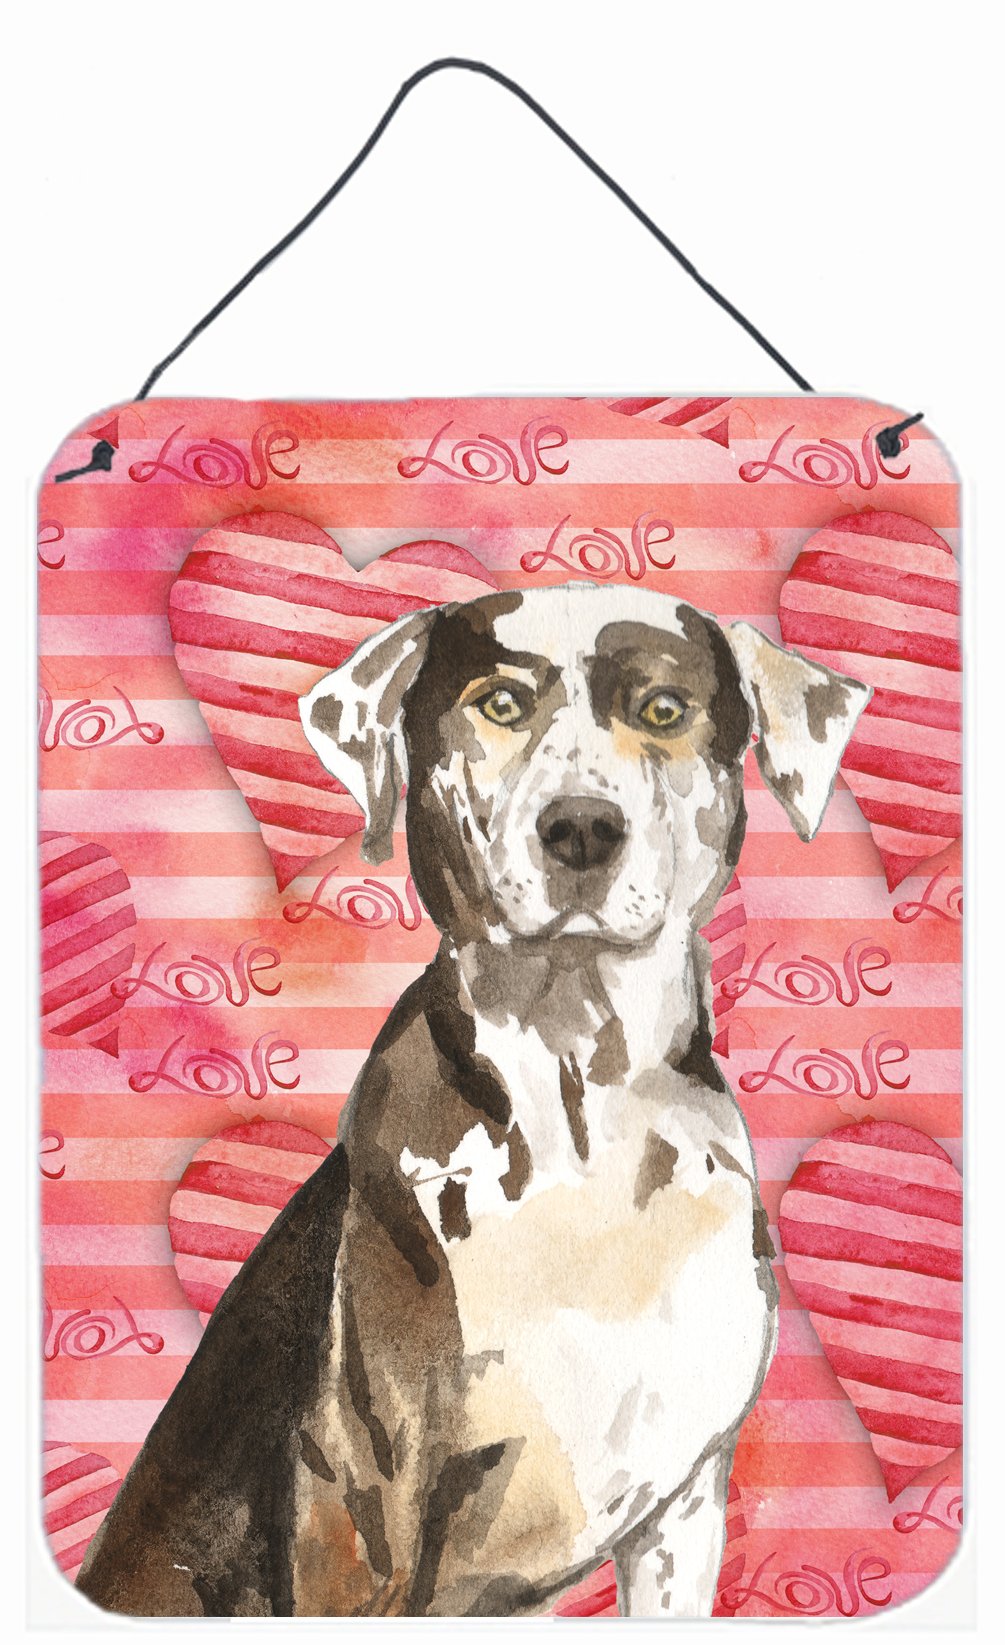 Love a Catahoula Leopard Dog Wall or Door Hanging Prints CK1771DS1216 by Caroline's Treasures